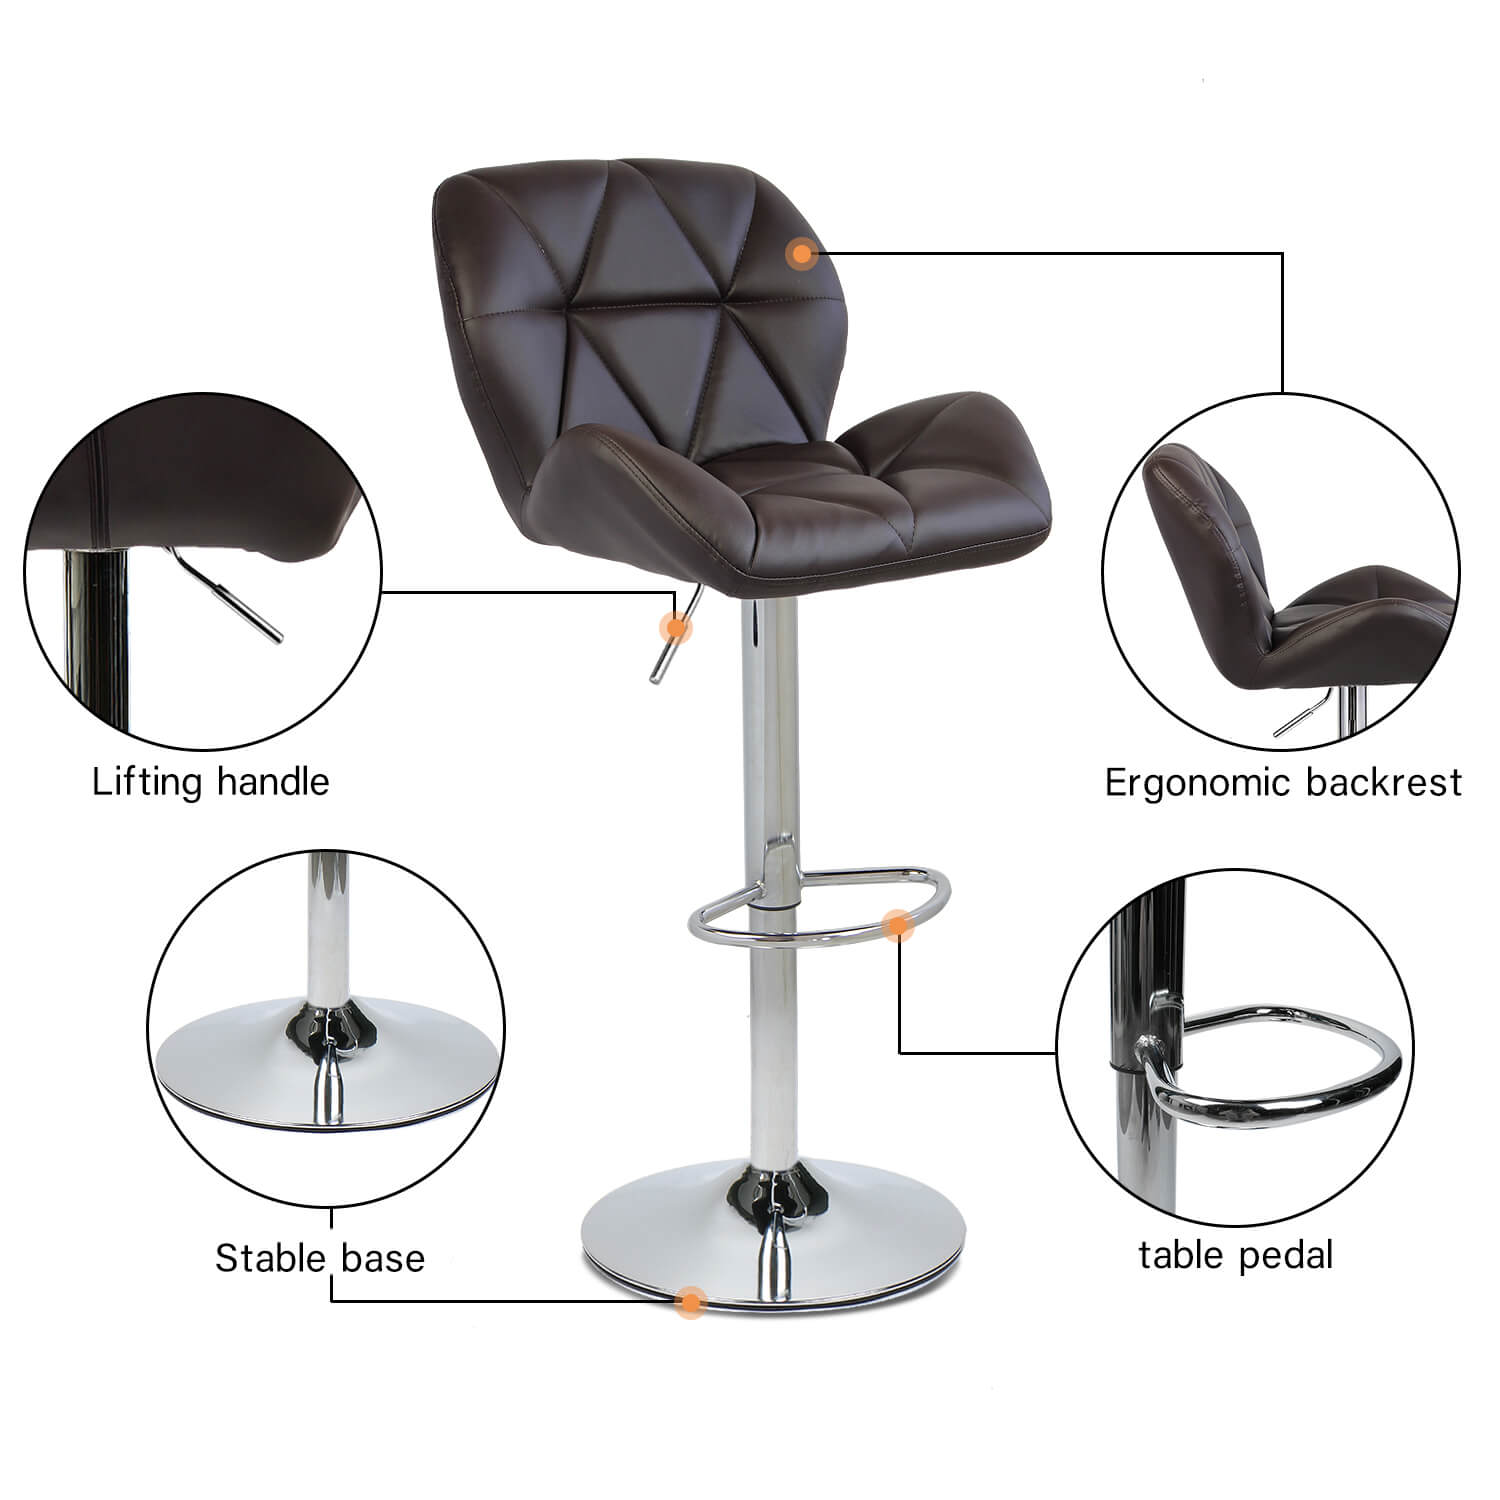 Elecwish brown bar stool OW001 has four features